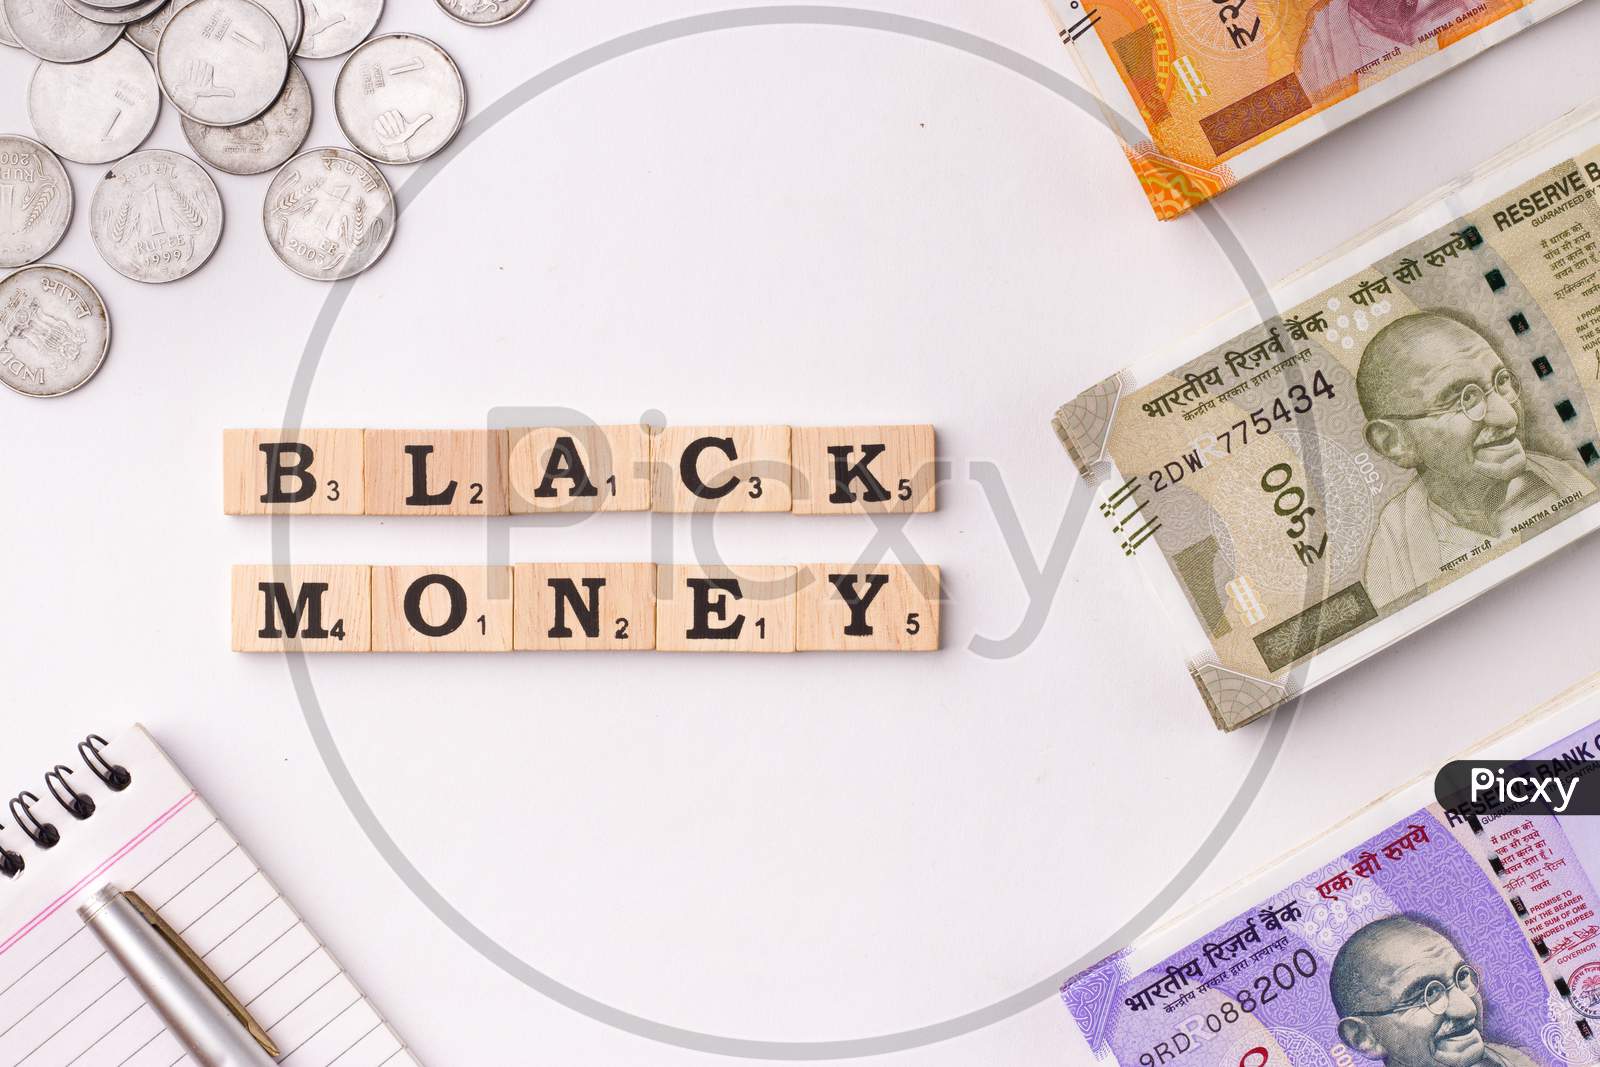 Assam, india - March 30, 2021 : Word BLACK MONEY written on wooden cubes stock image.